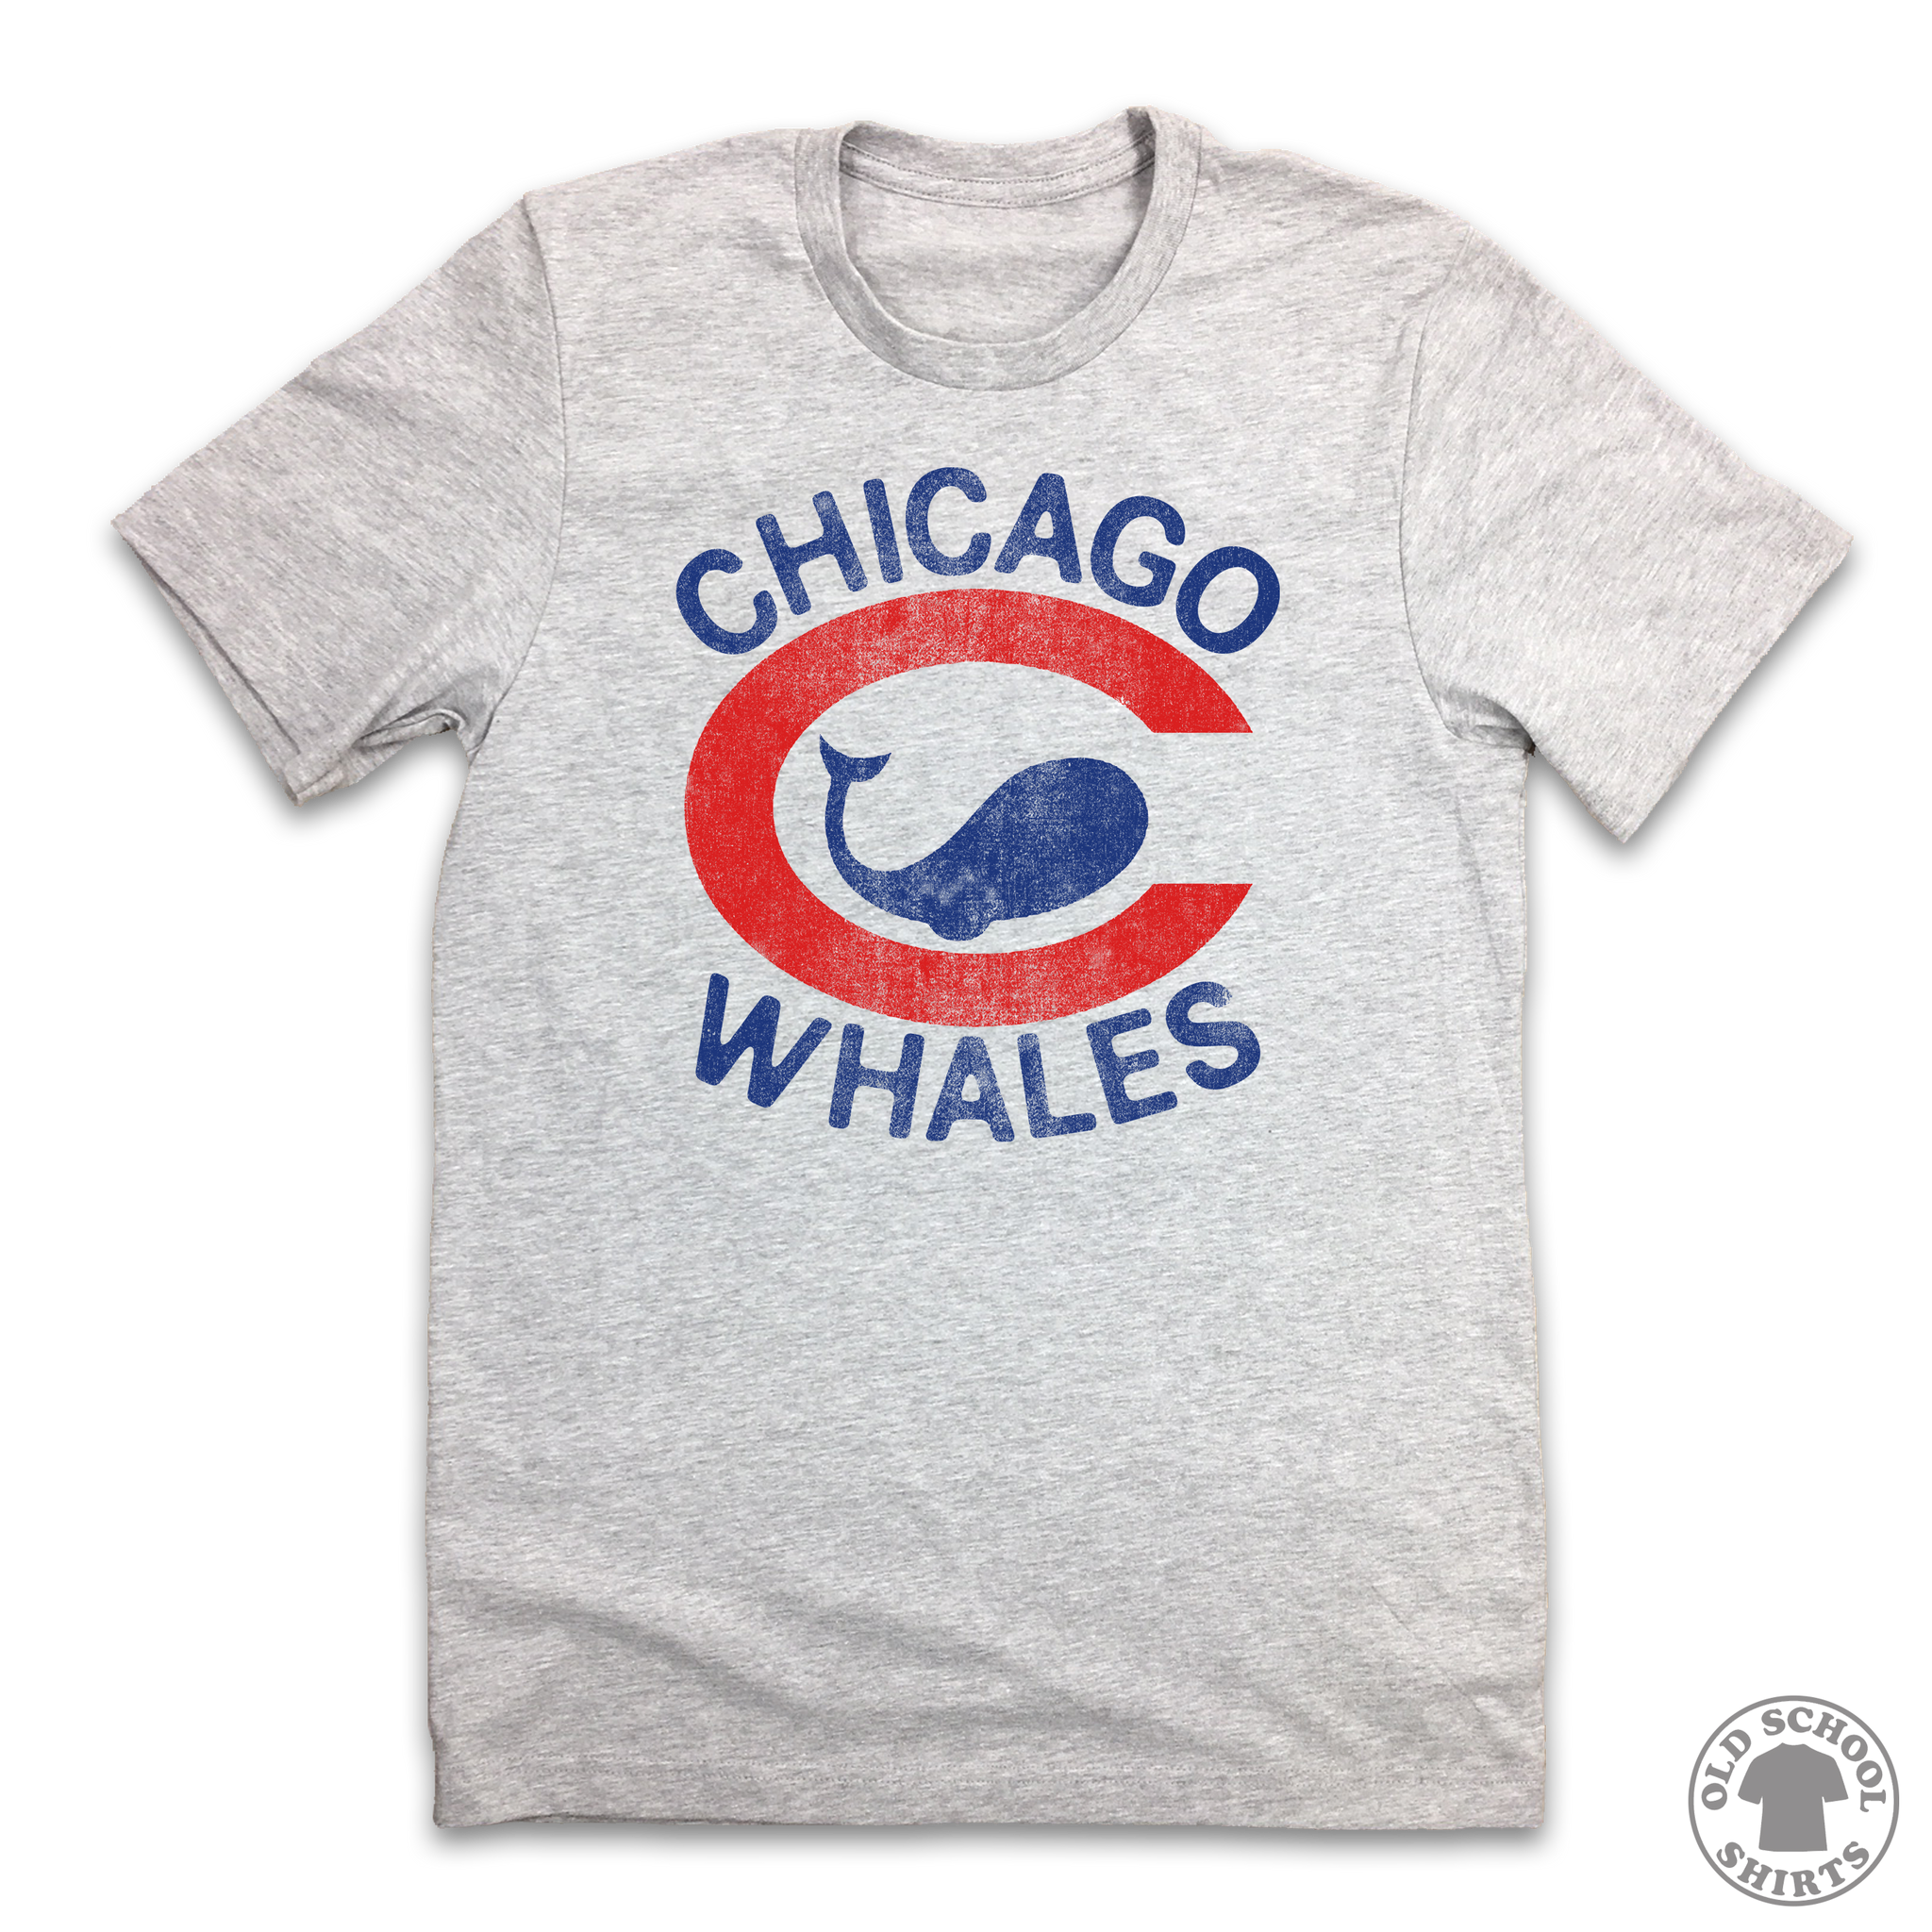 Chicago Whales | OldSchoolShirts.com